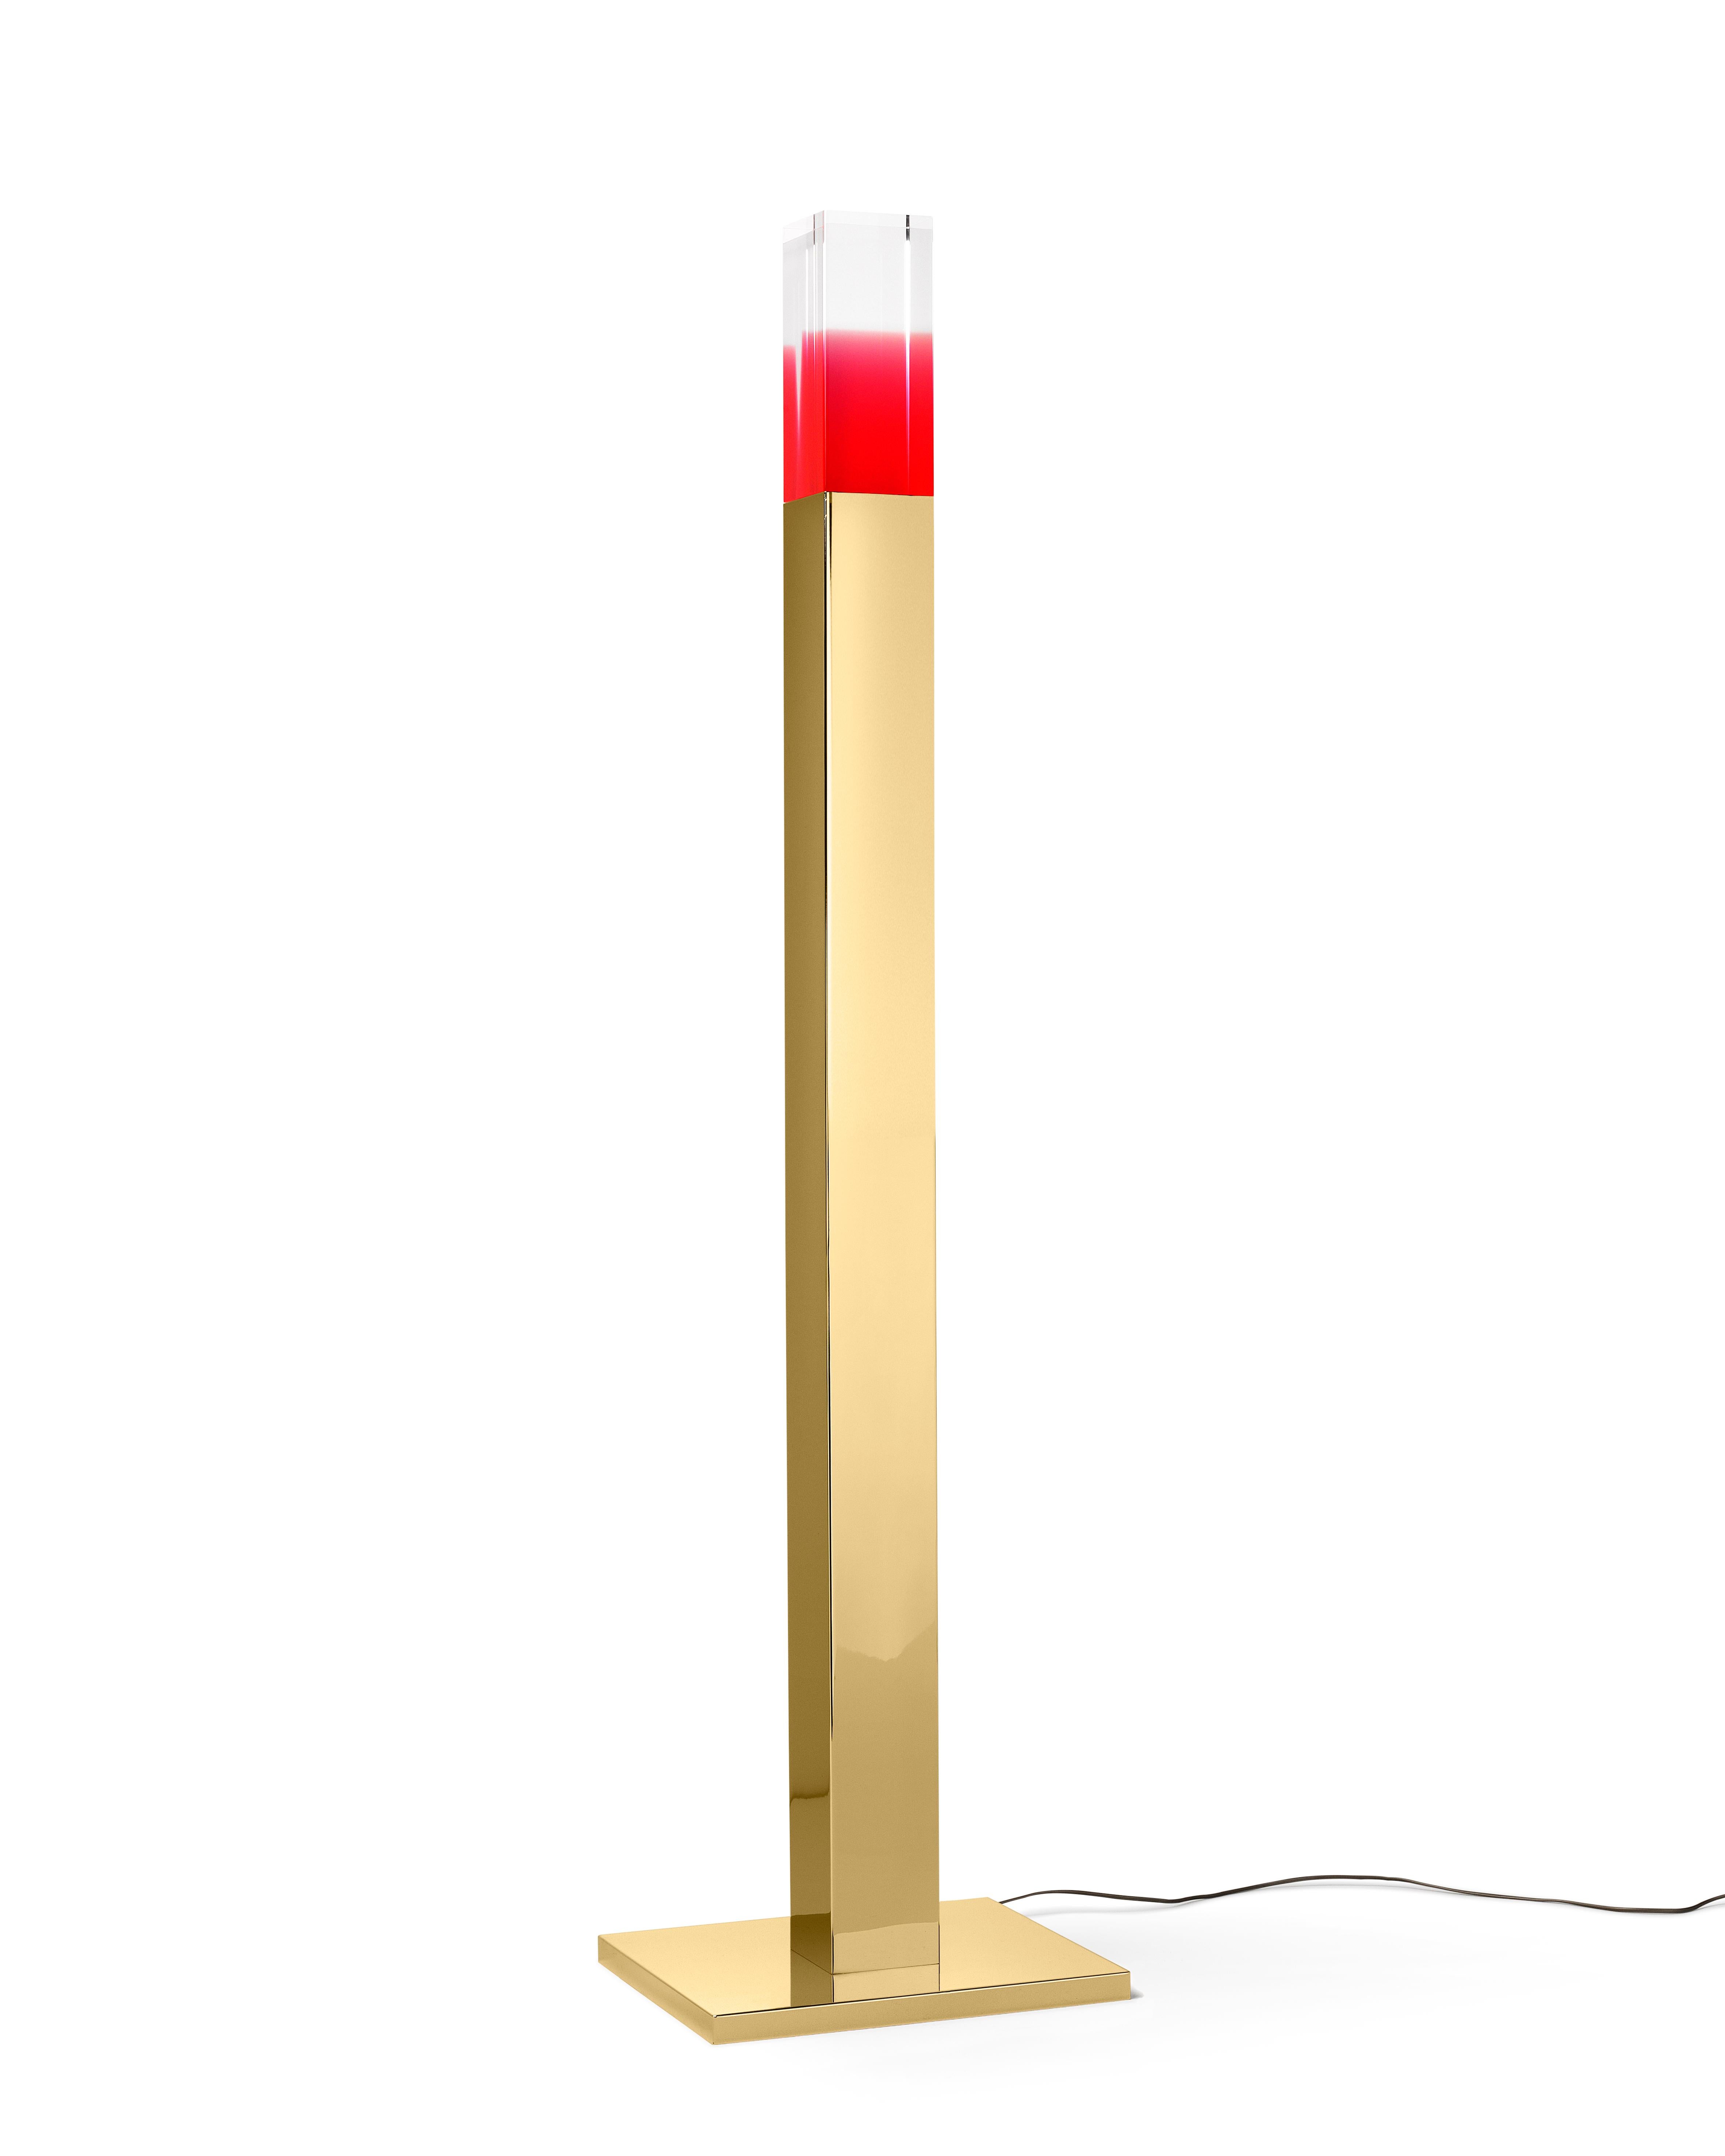 Floor lamp with plexi terminal. Floor lamp in stainless steel and plexiglass.

Materials:
Stainless steel with 24-karat gold galvanic and plexiglass.